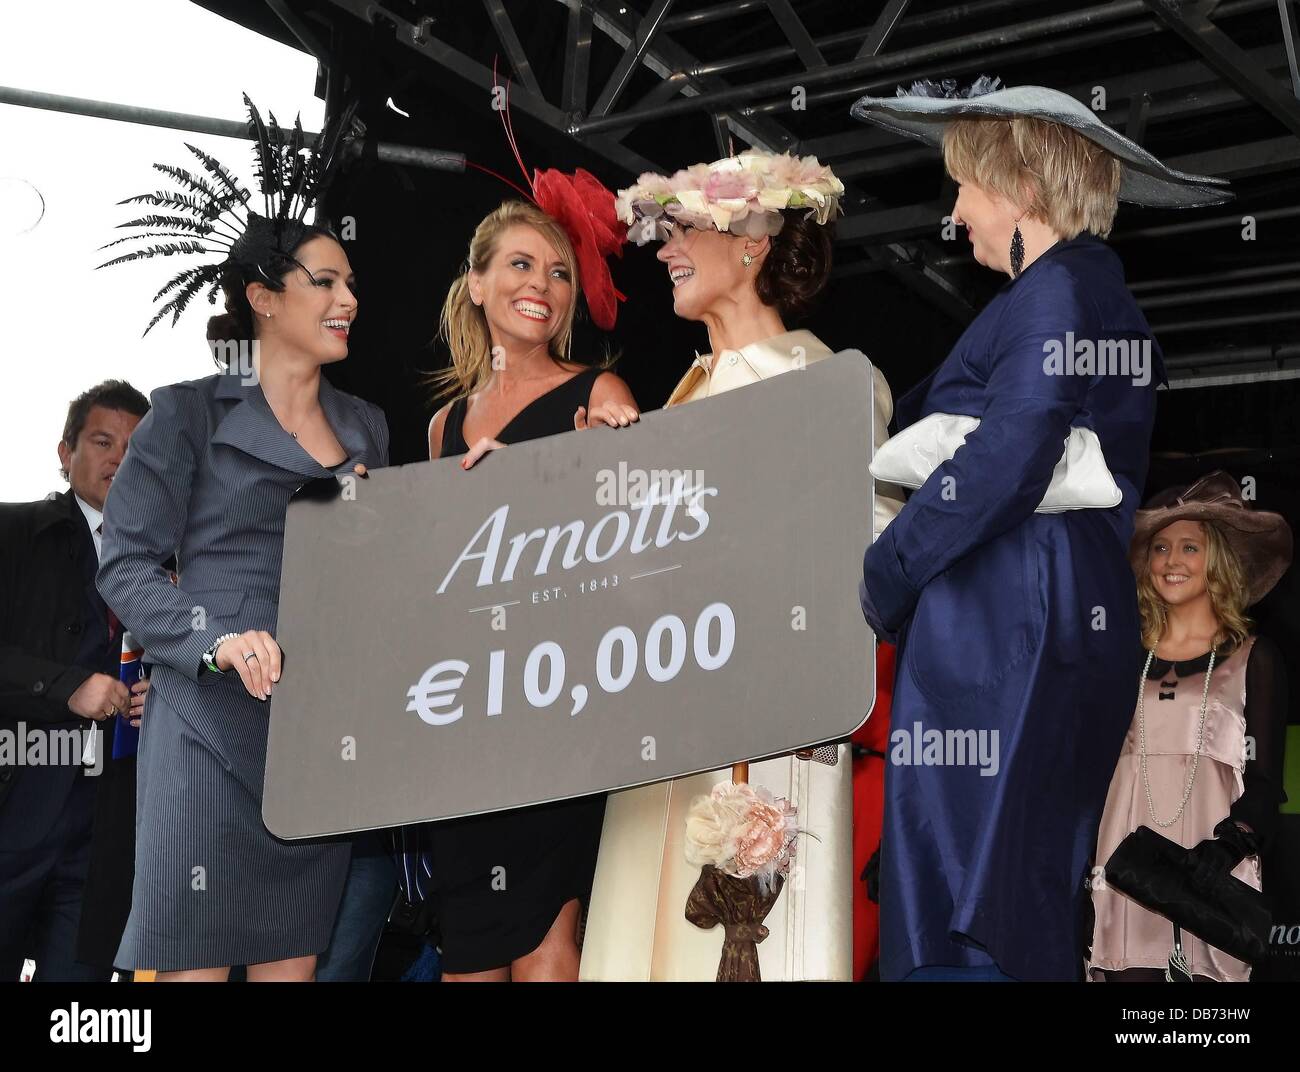 Grainne Seoige & Maria Cullen Hanley Maria Cullen Hanley from Meath won Best Dressed Lady and 10,000 Euro voucher from Arnotts at Punchestown Ladies Day final, Punchestown Racecourse, Ireland - 06.05.11. Stock Photo